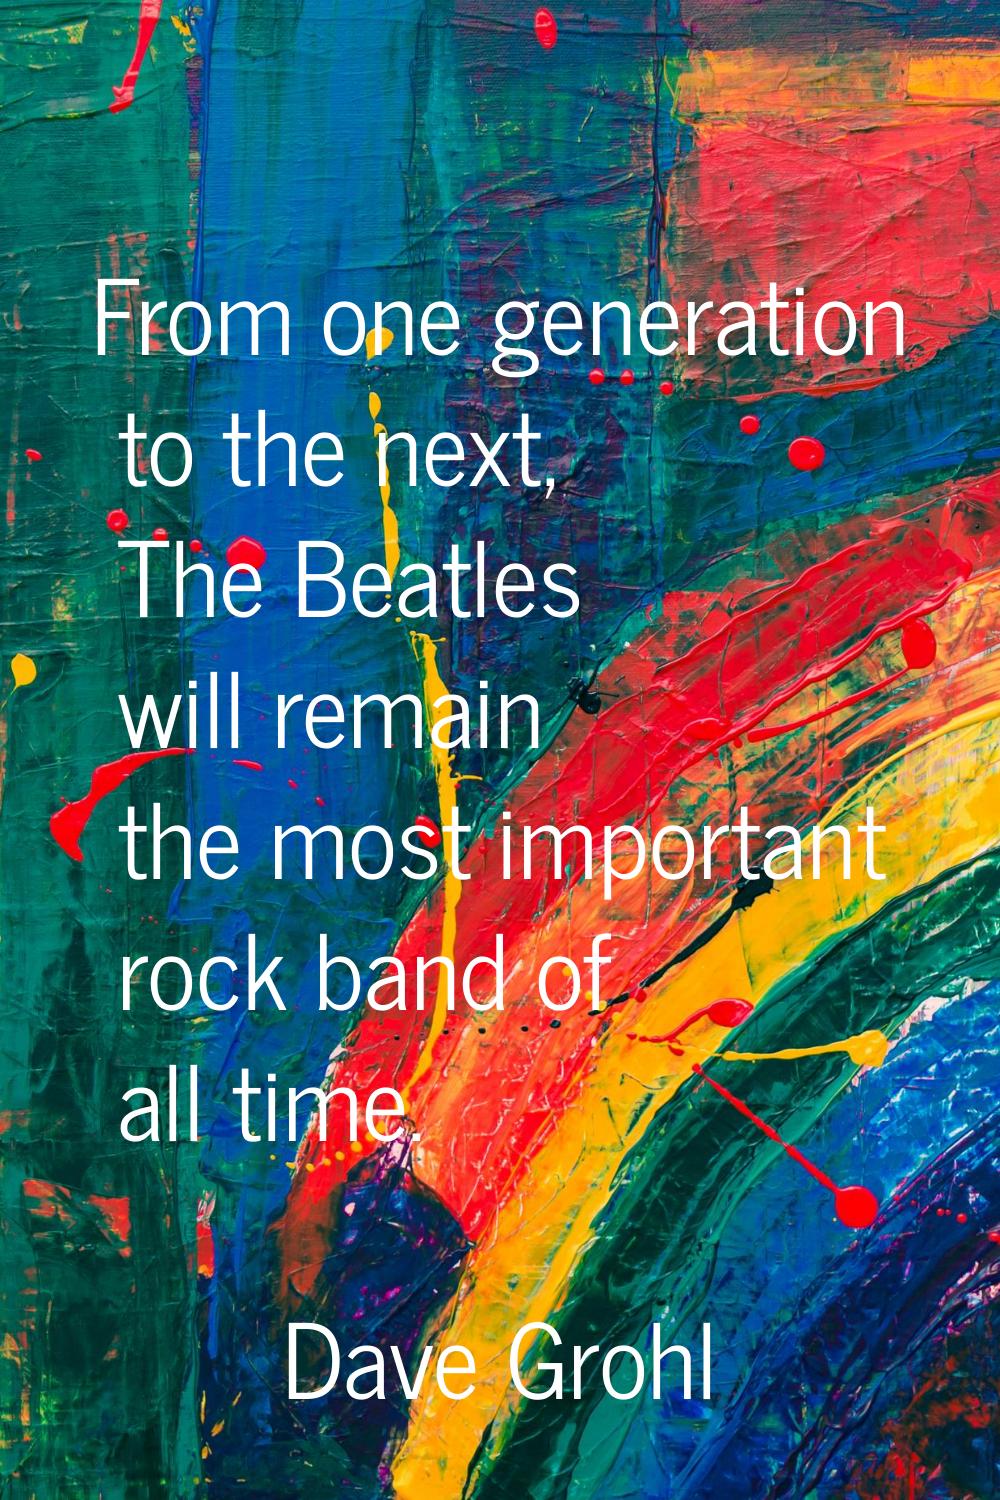 From one generation to the next, The Beatles will remain the most important rock band of all time.